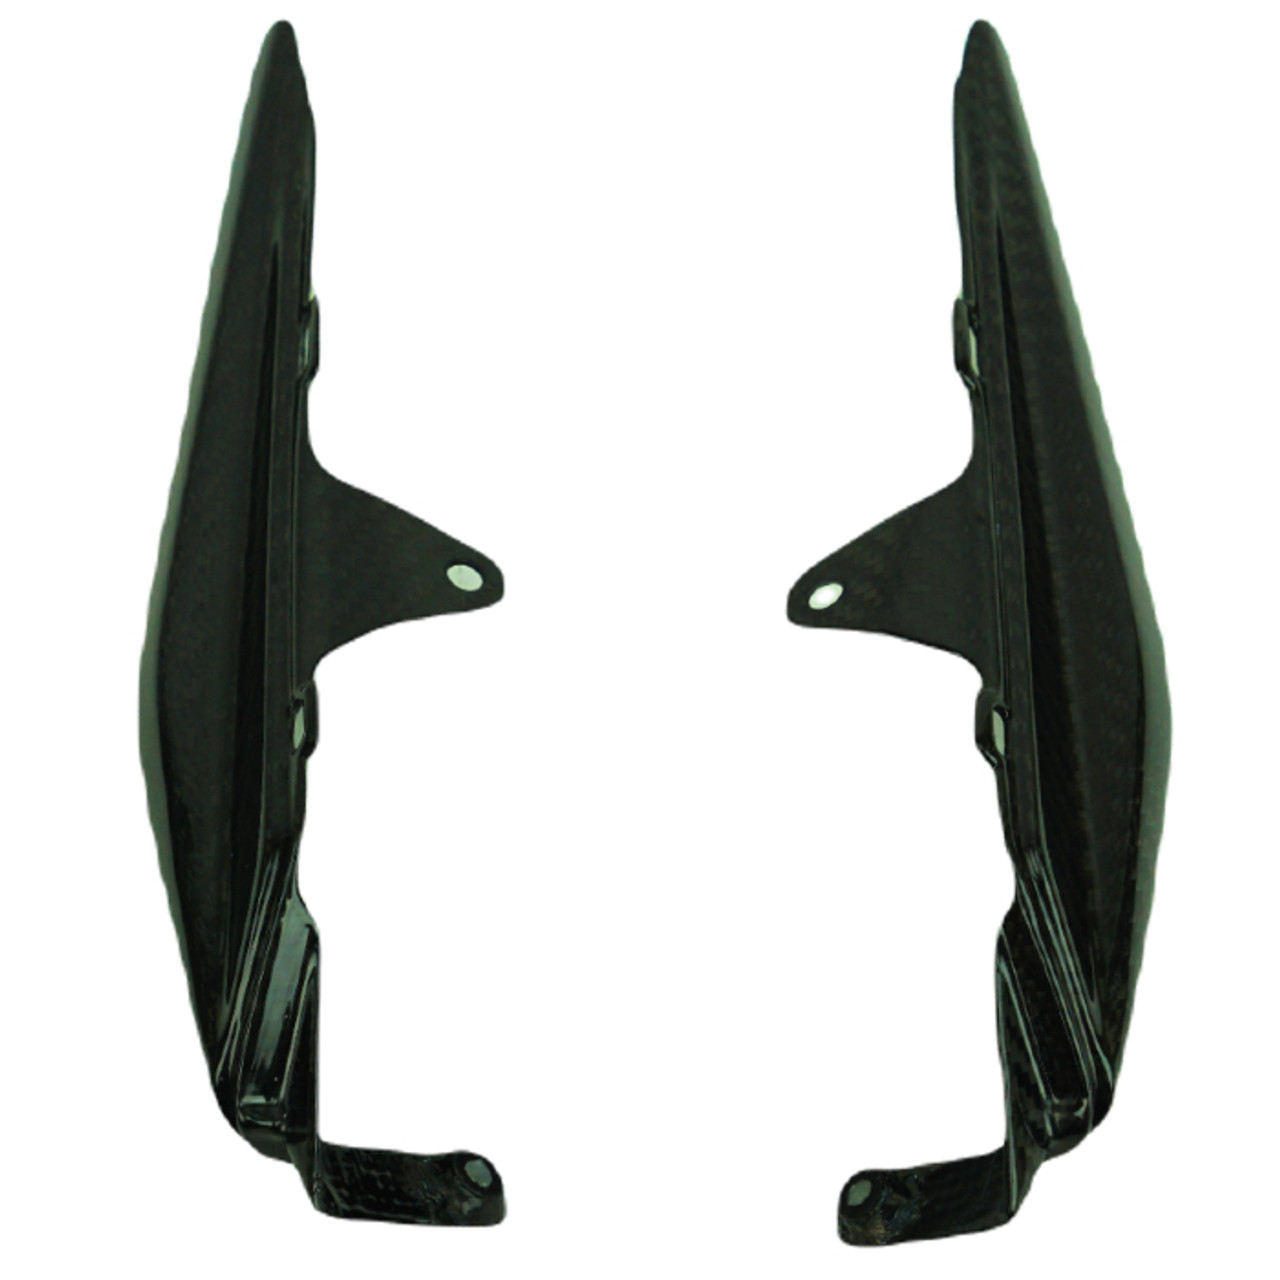 (Discontinued) Small Tail Covers in Carbon with Fiberglass for Kawasaki  ZX10R 2011-2015 